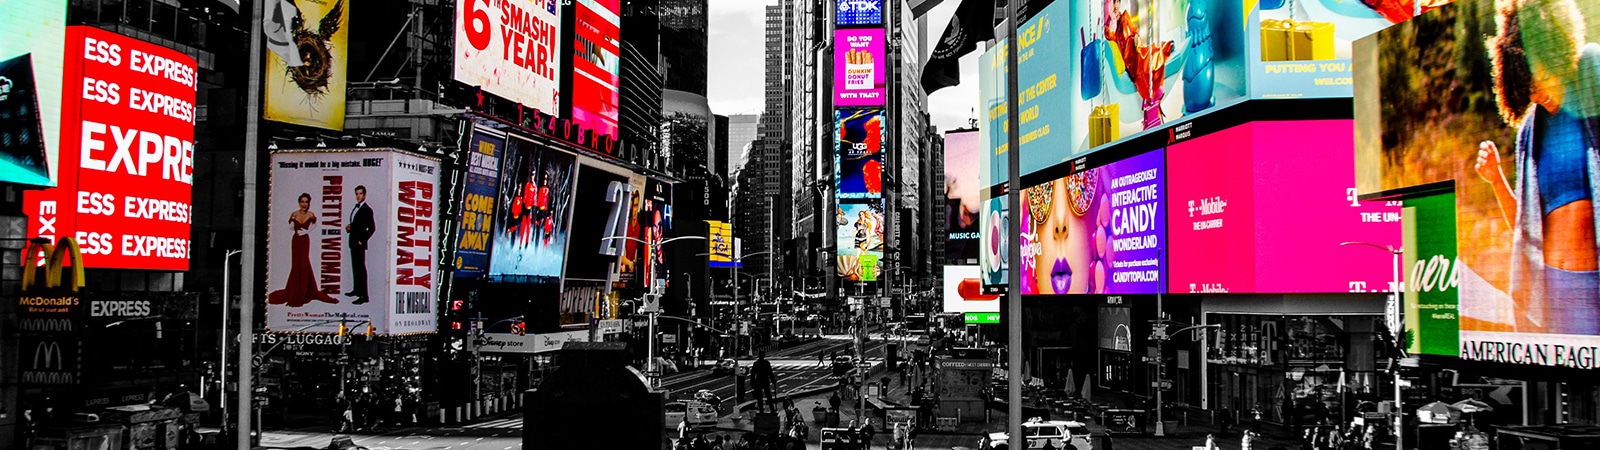 Advertising Times Square